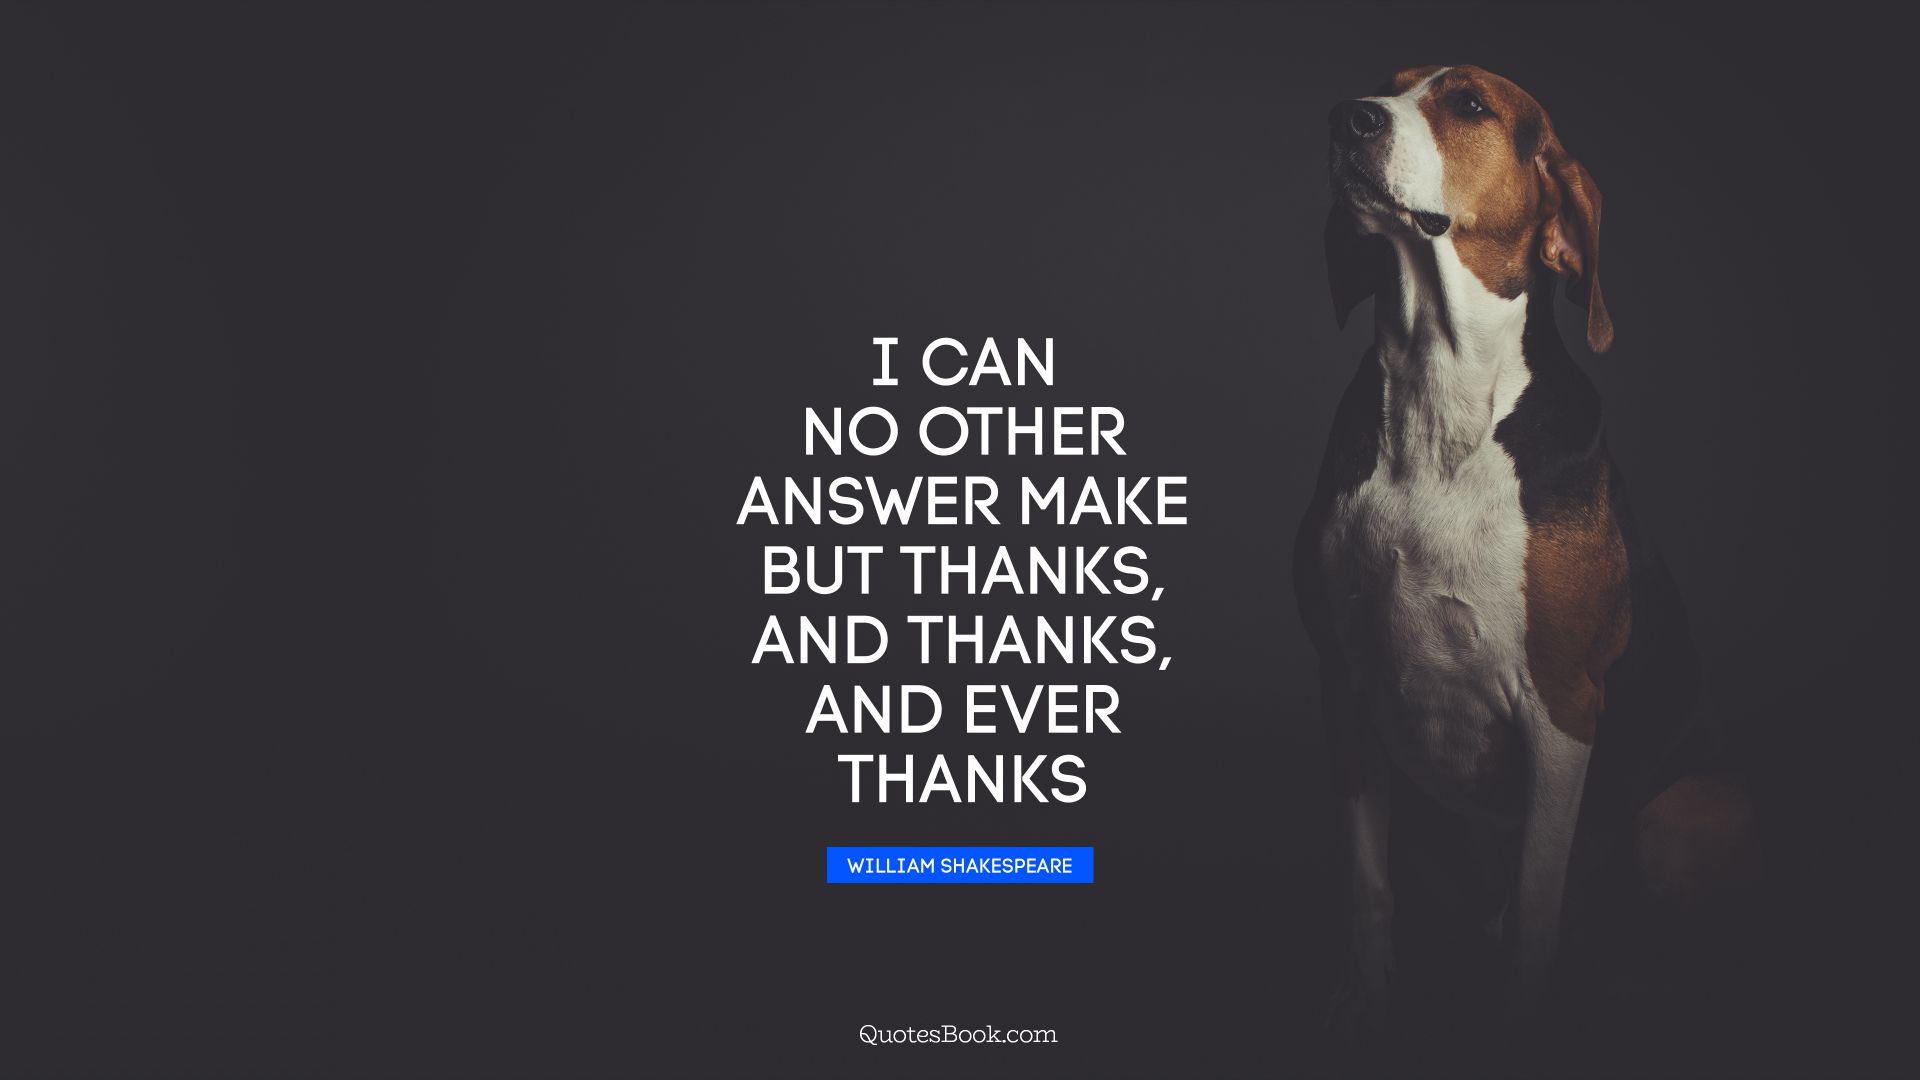 I can no other answer make but thanks, and thanks, and ever thanks. - Quote by William Shakespeare